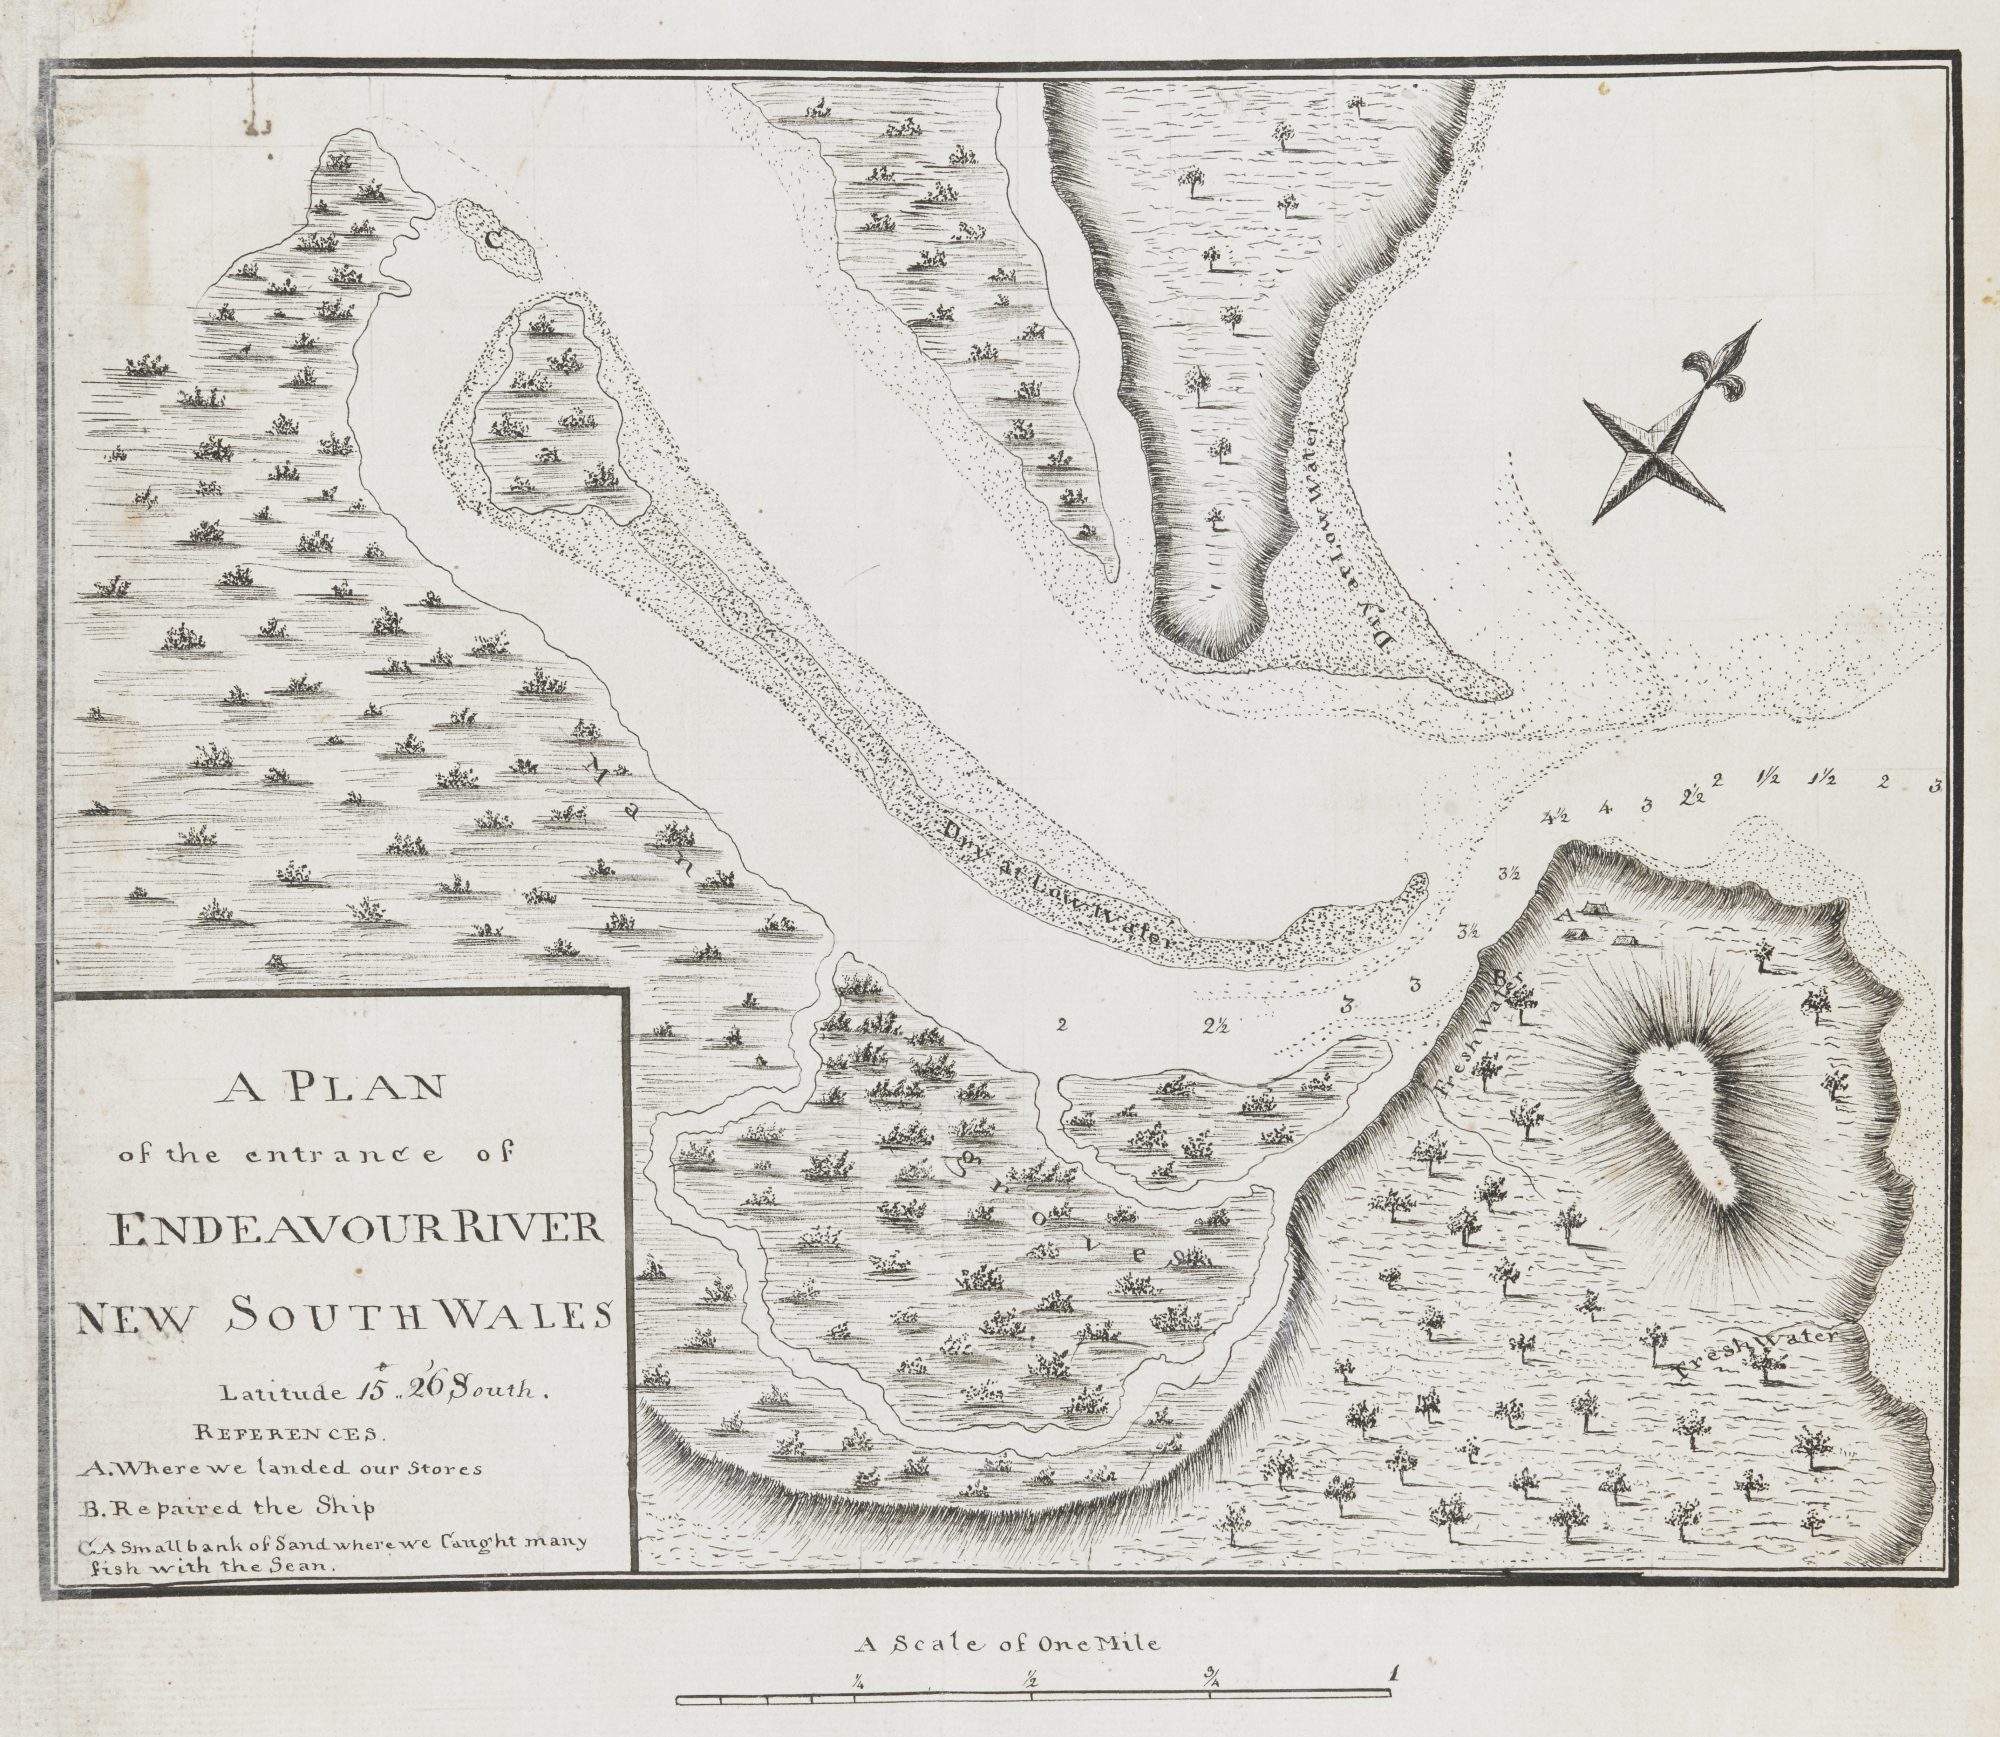 Cook’s map of the Endeavour River
